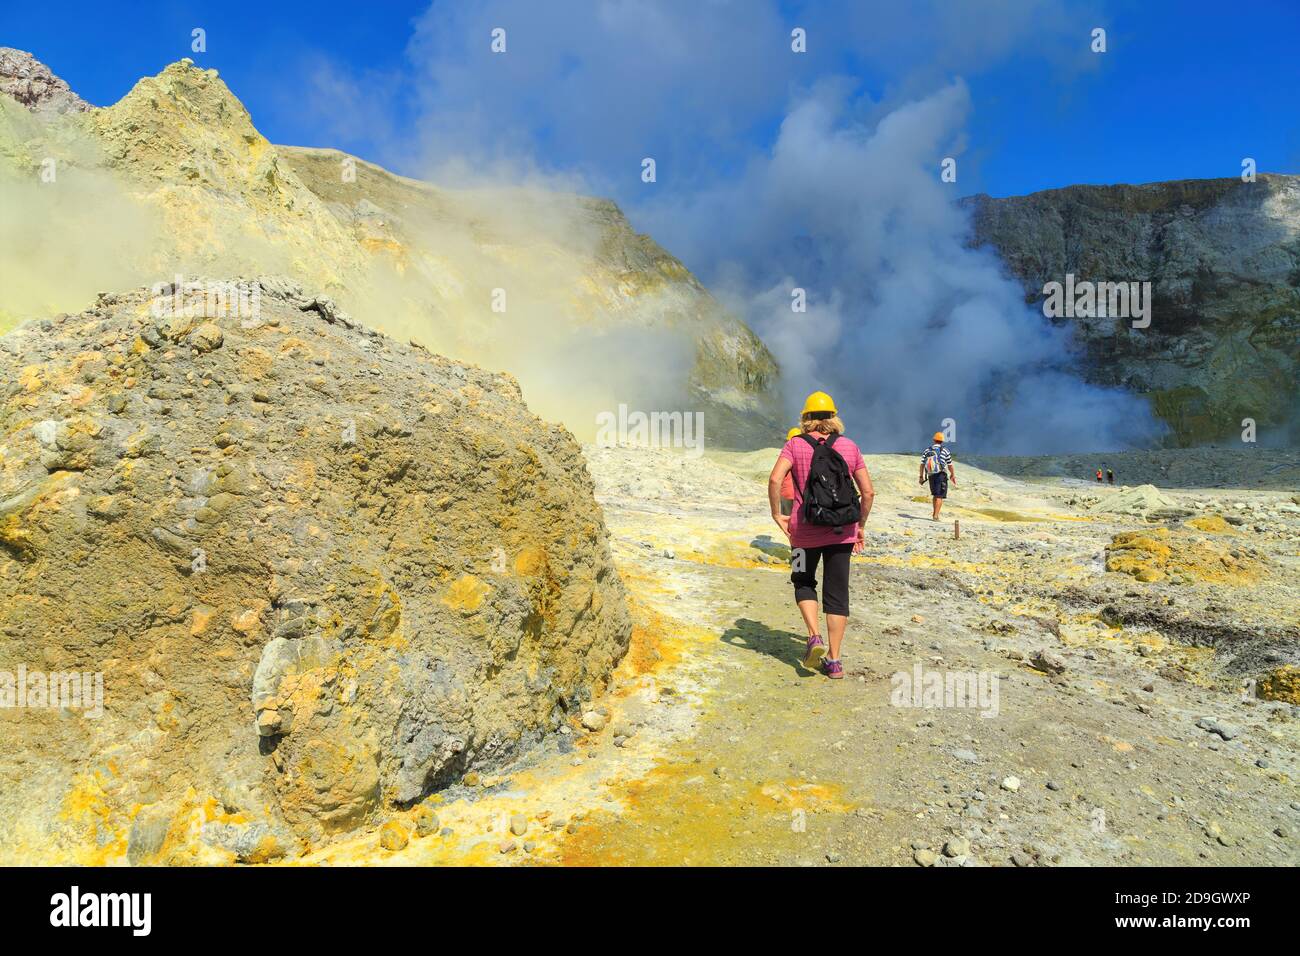 Tourists walking through the landscape of White Island, an active volcano in the Bay of Plenty, New Zealand, towards the steaming crater lake Stock Photo